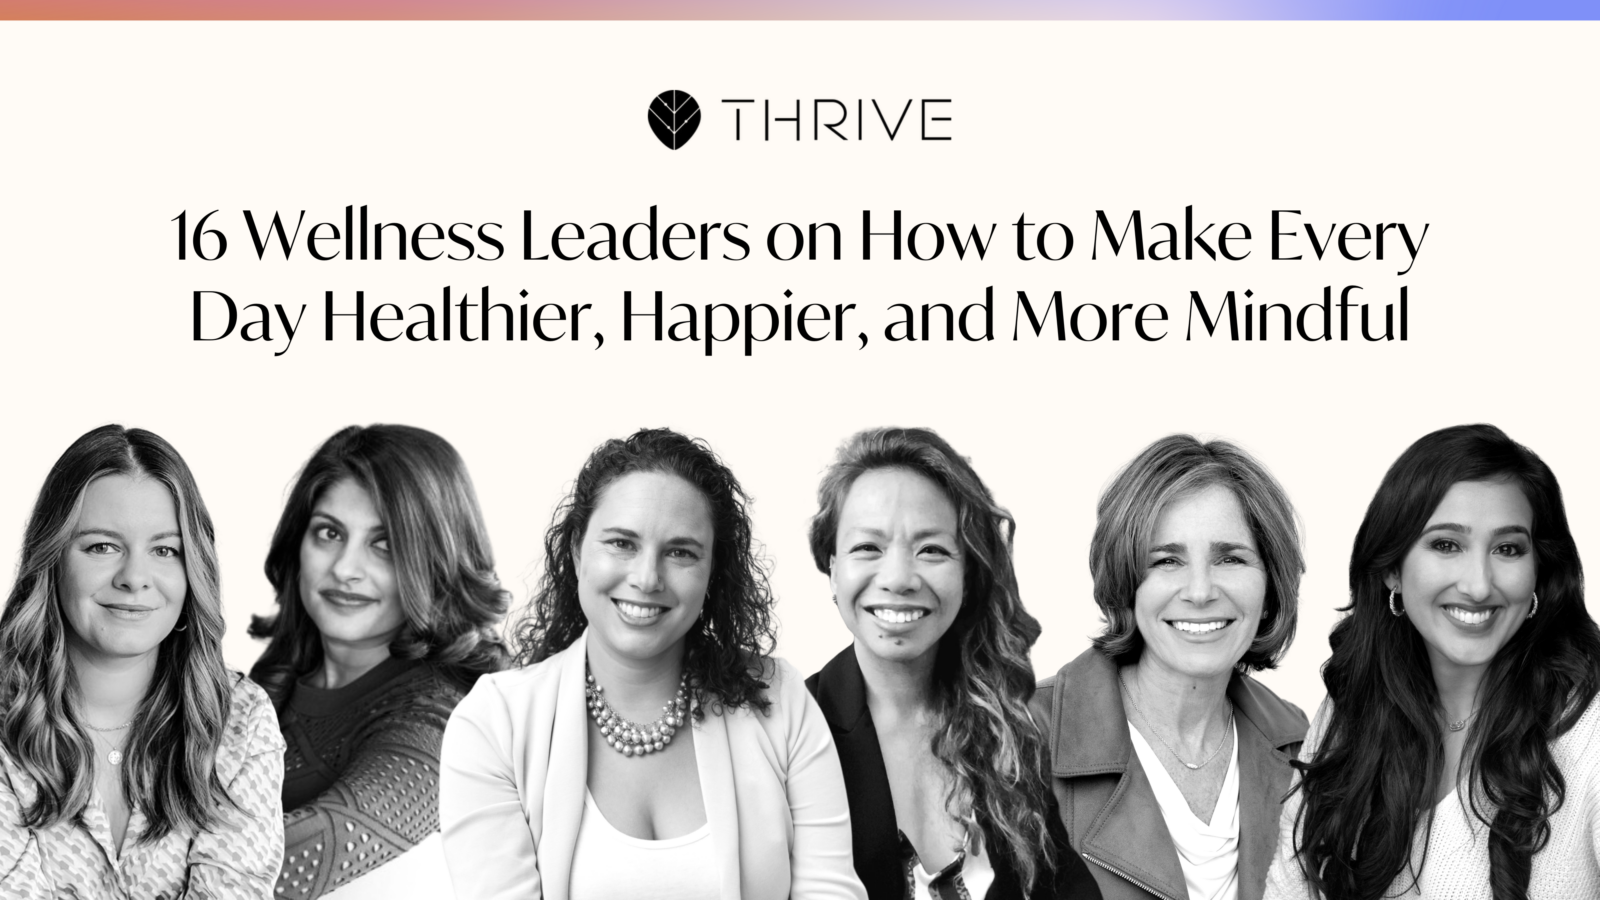 16 Wellness Leaders on How to Make Every Day Healthier, Happier, and More Mindful